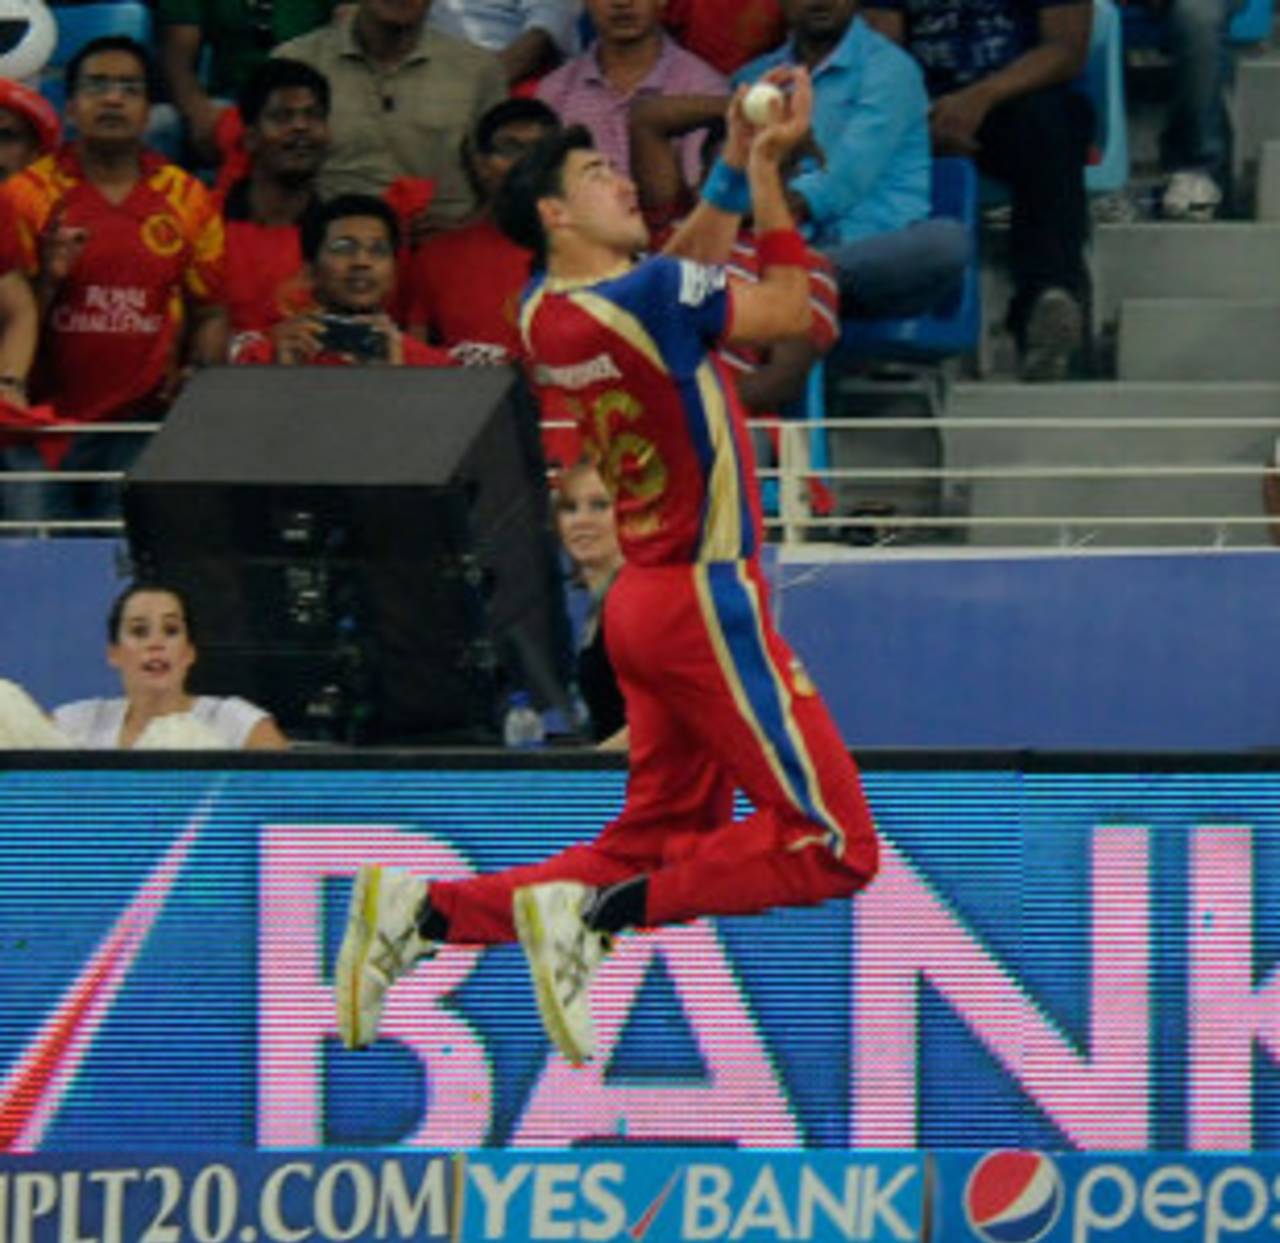 Mitchell Starc takes the first of two amazing catches, Kings XI Punjab v Royal Challengers Bangalore, IPL 2014, Dubai, April 28, 2014